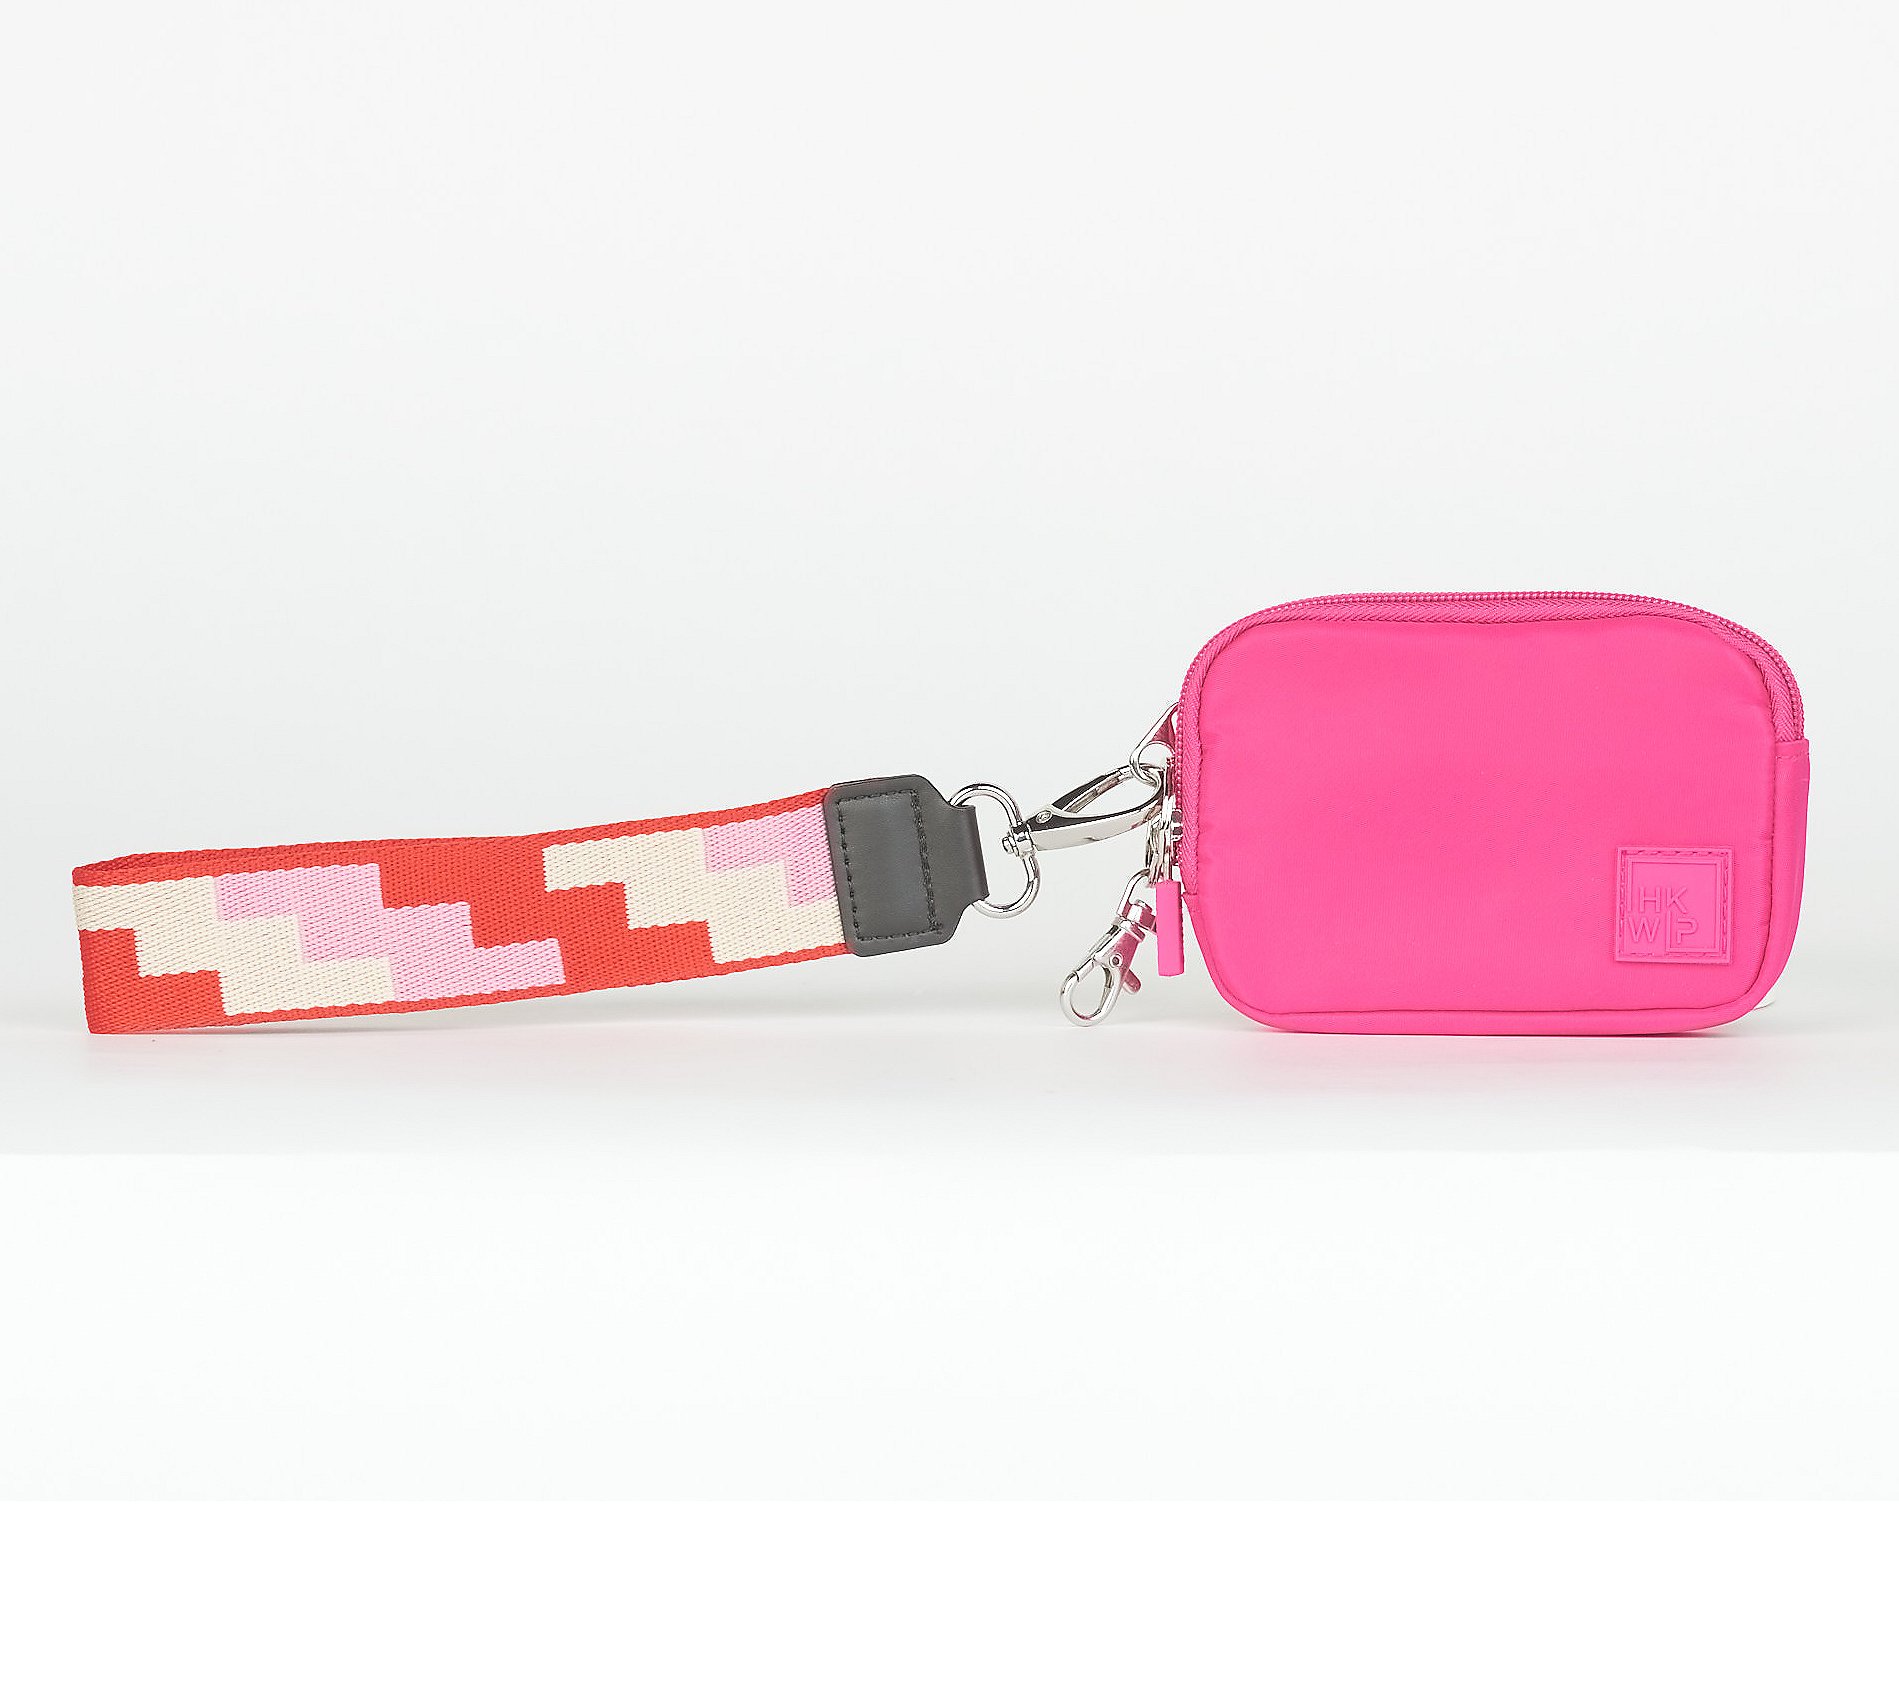 IHKWIP Day to Day RFID Wallet Wristlet - QVC.com